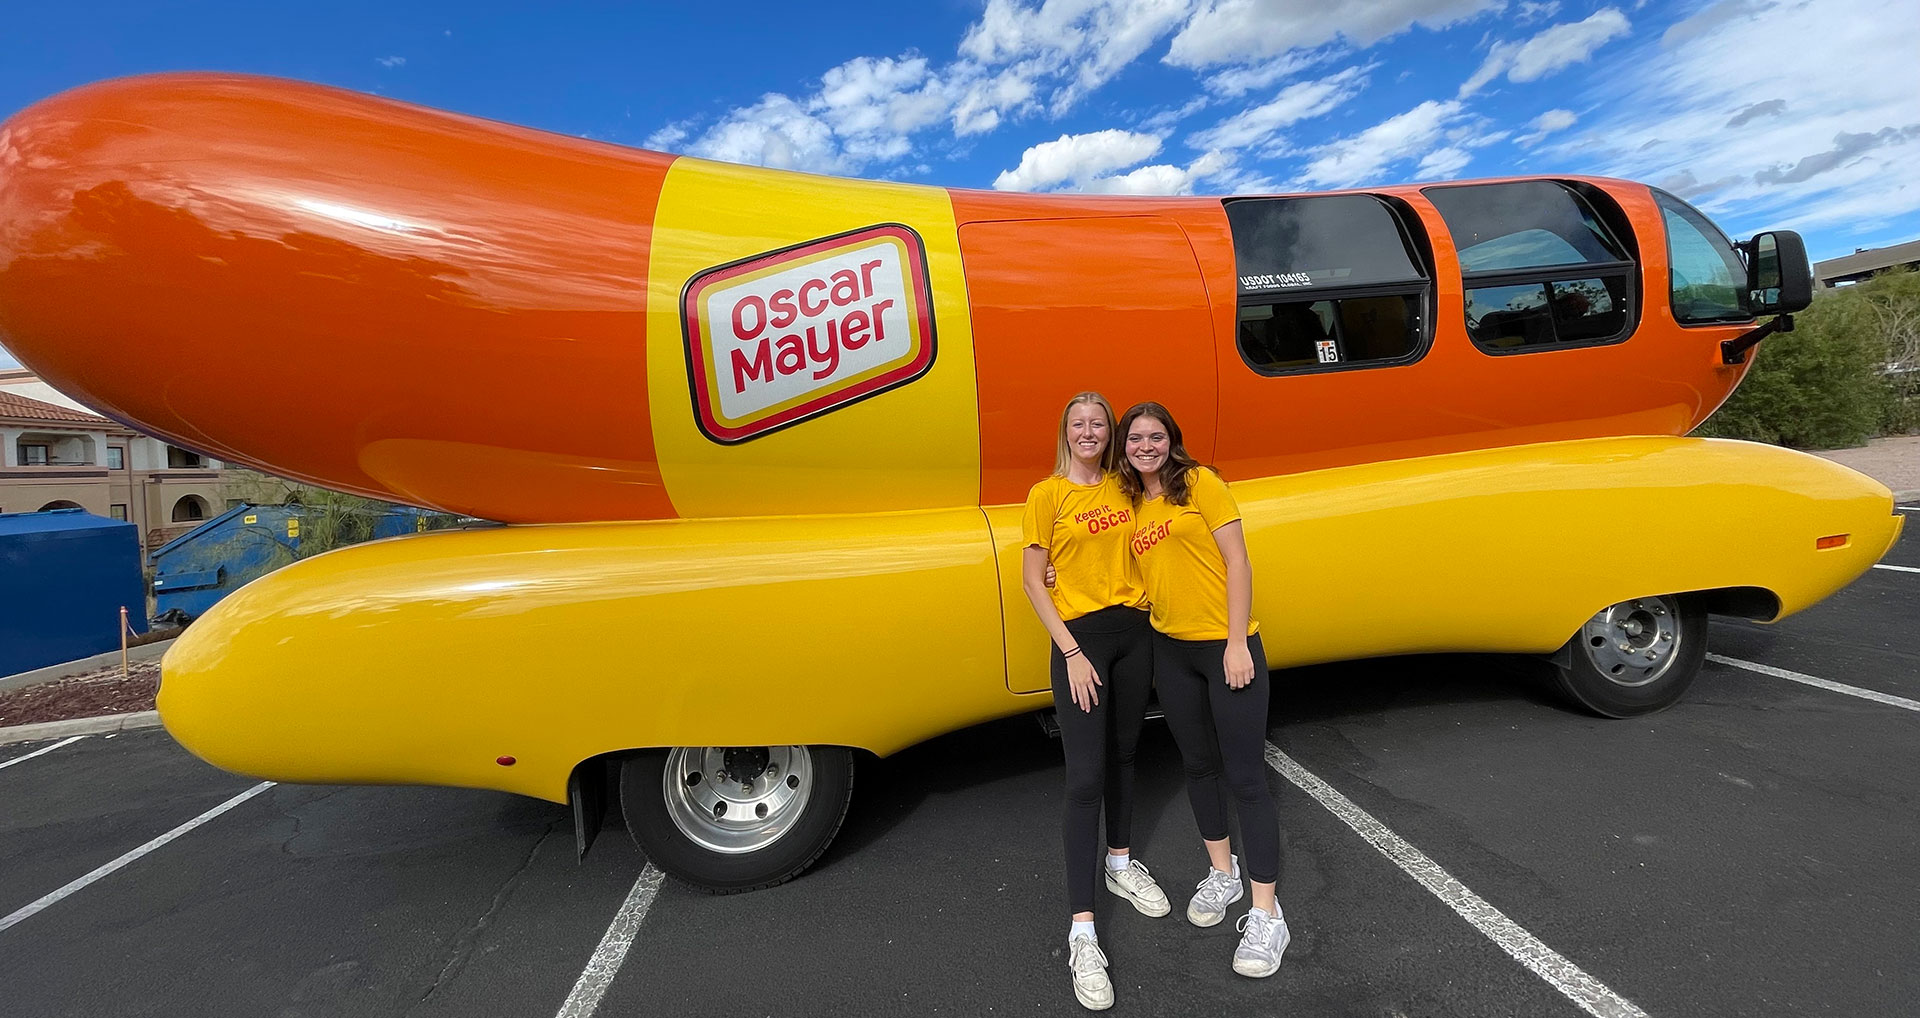 From left to right: Ann Kerr ("Angus Ann") and Allison Silibovsky ("Allie Dog") stand in front of the Oscar-Meyer Weinermobile in Tucson, Ariz. on Friday, Nov. 17. The iconic vehicle has been a part of the brand since the 1930s.  